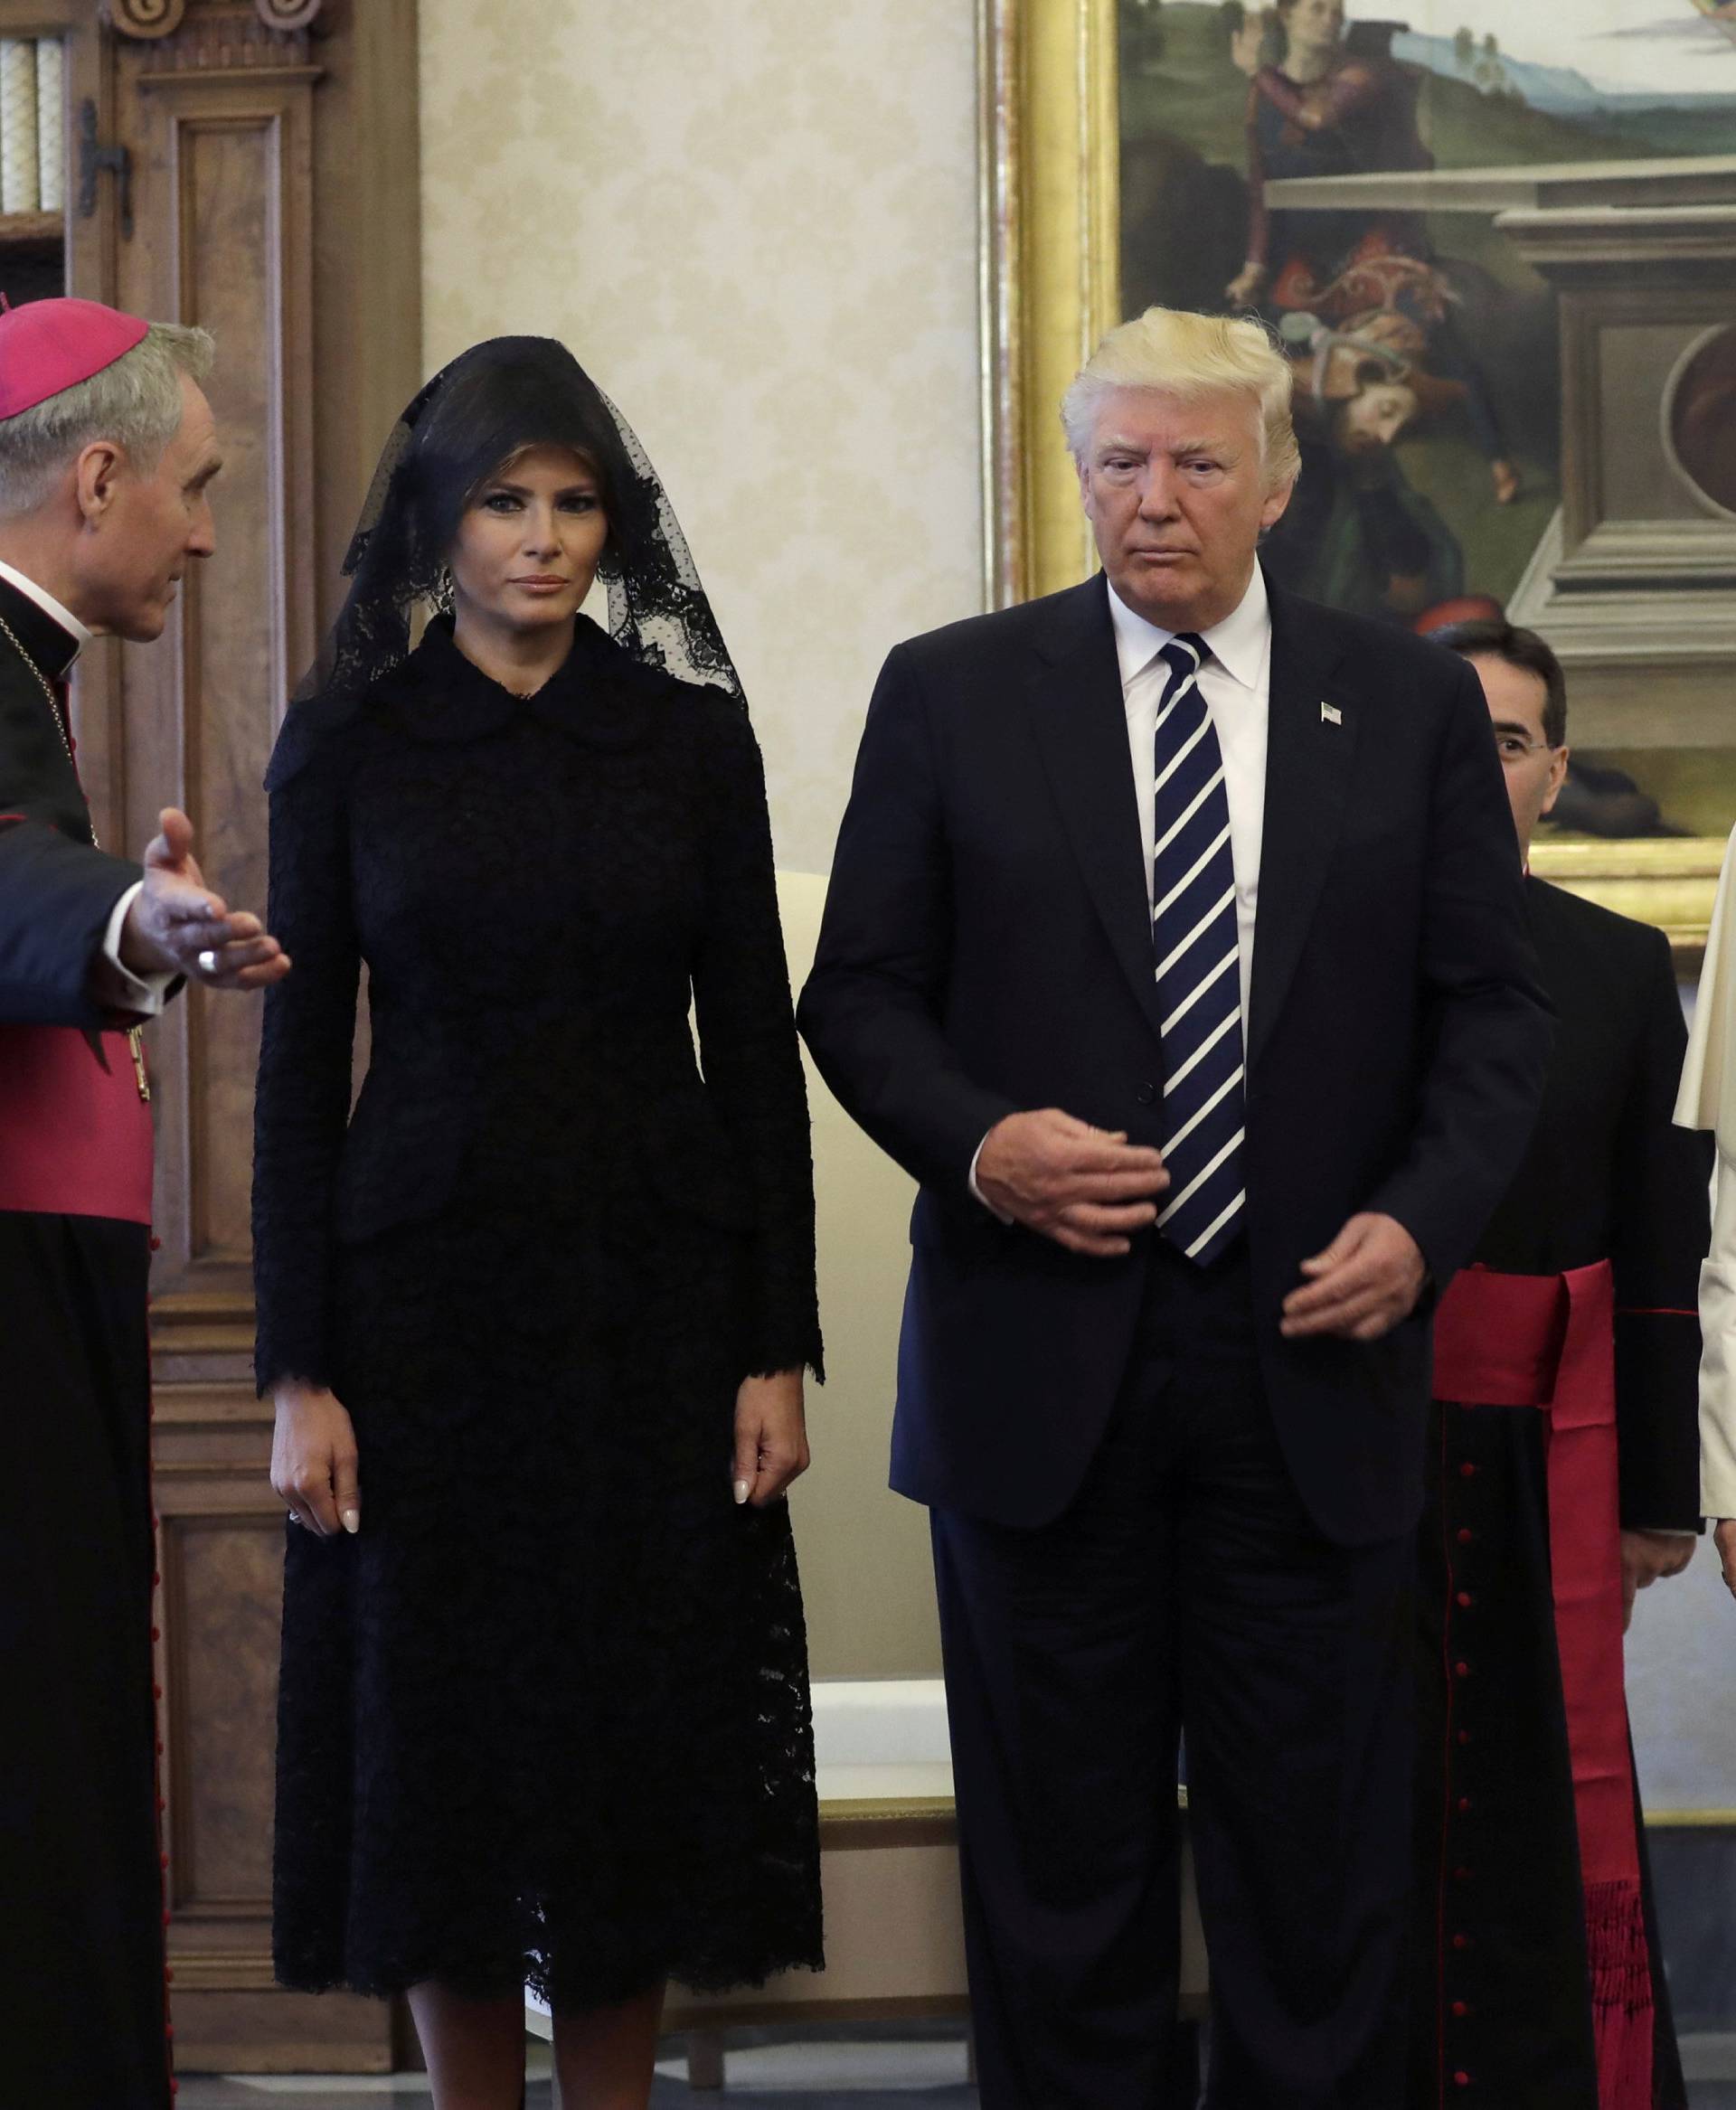 U.S. President Donald Trump and first lady Melania are greeted by Pope Francis during a private audience at the Vatican